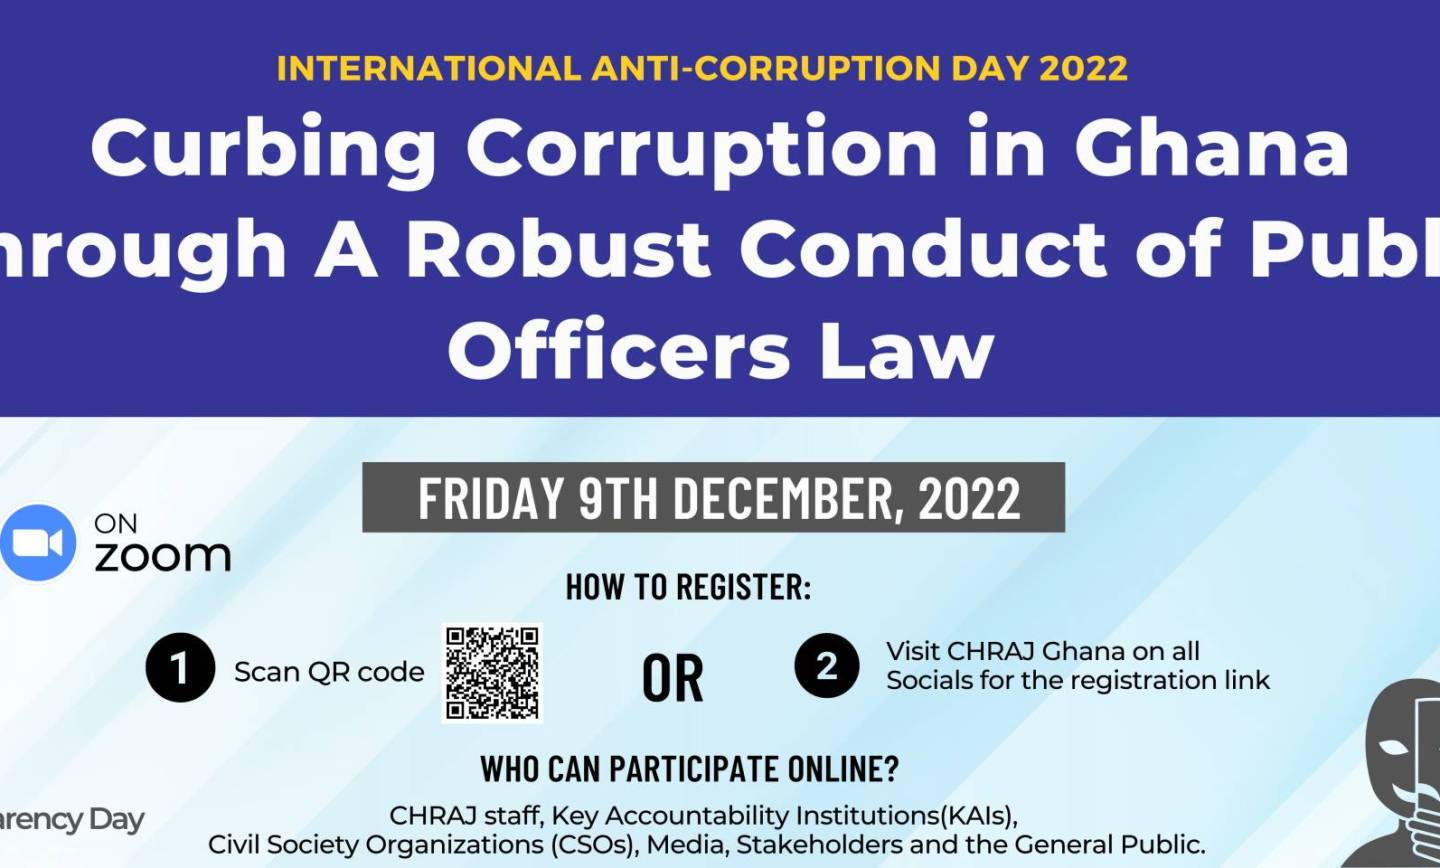 INTERNATIONAL ANTI-CORRUPTION DAY 2022. SCAN QR CODE OR CLICK ON THE LINK BELOW TO REGISTER.